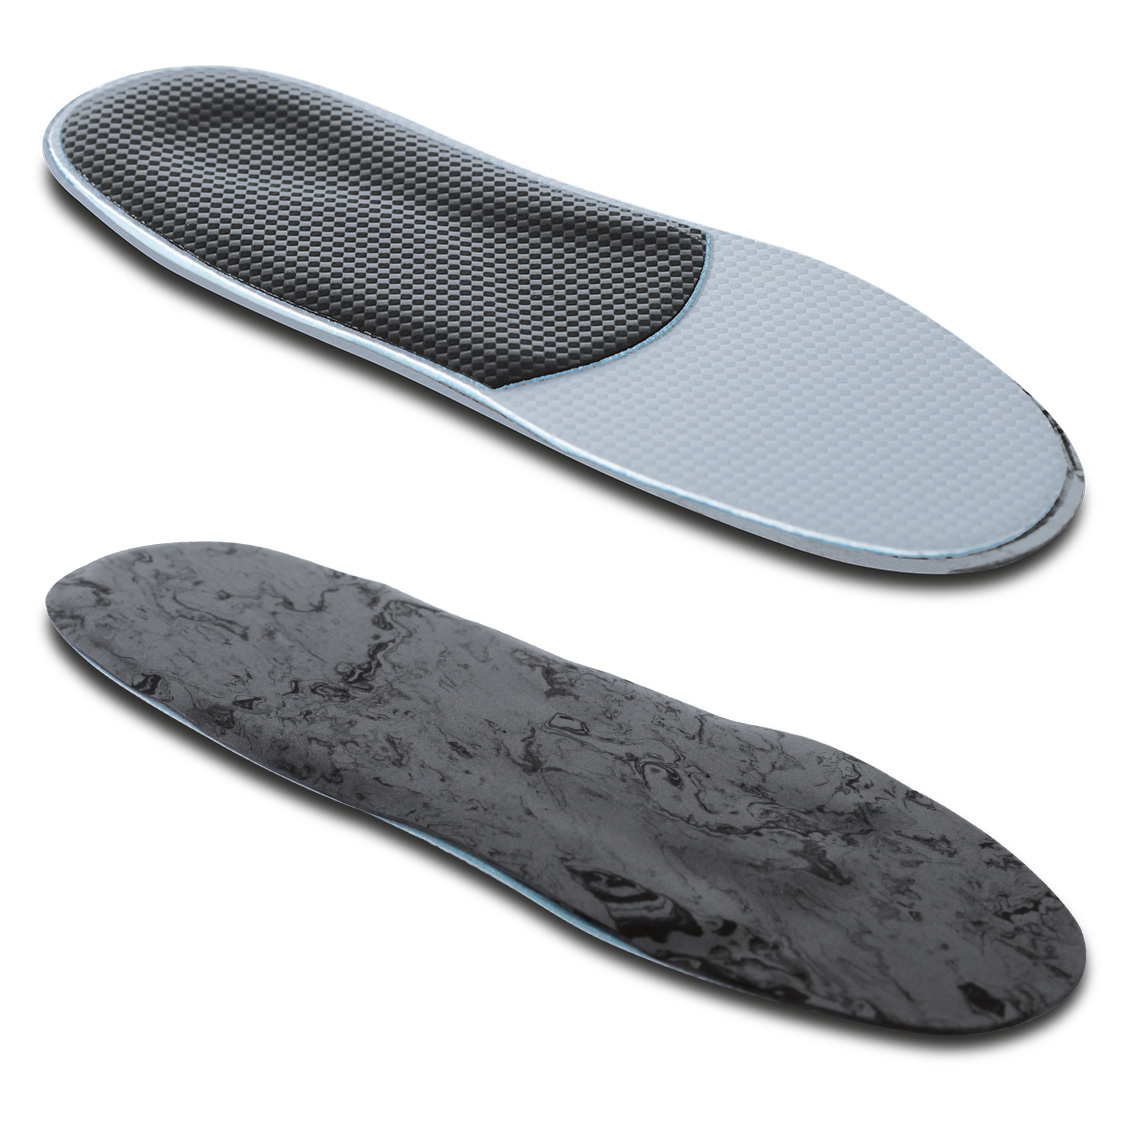 Semi-finished resin insoles for arch support to be thermoformed